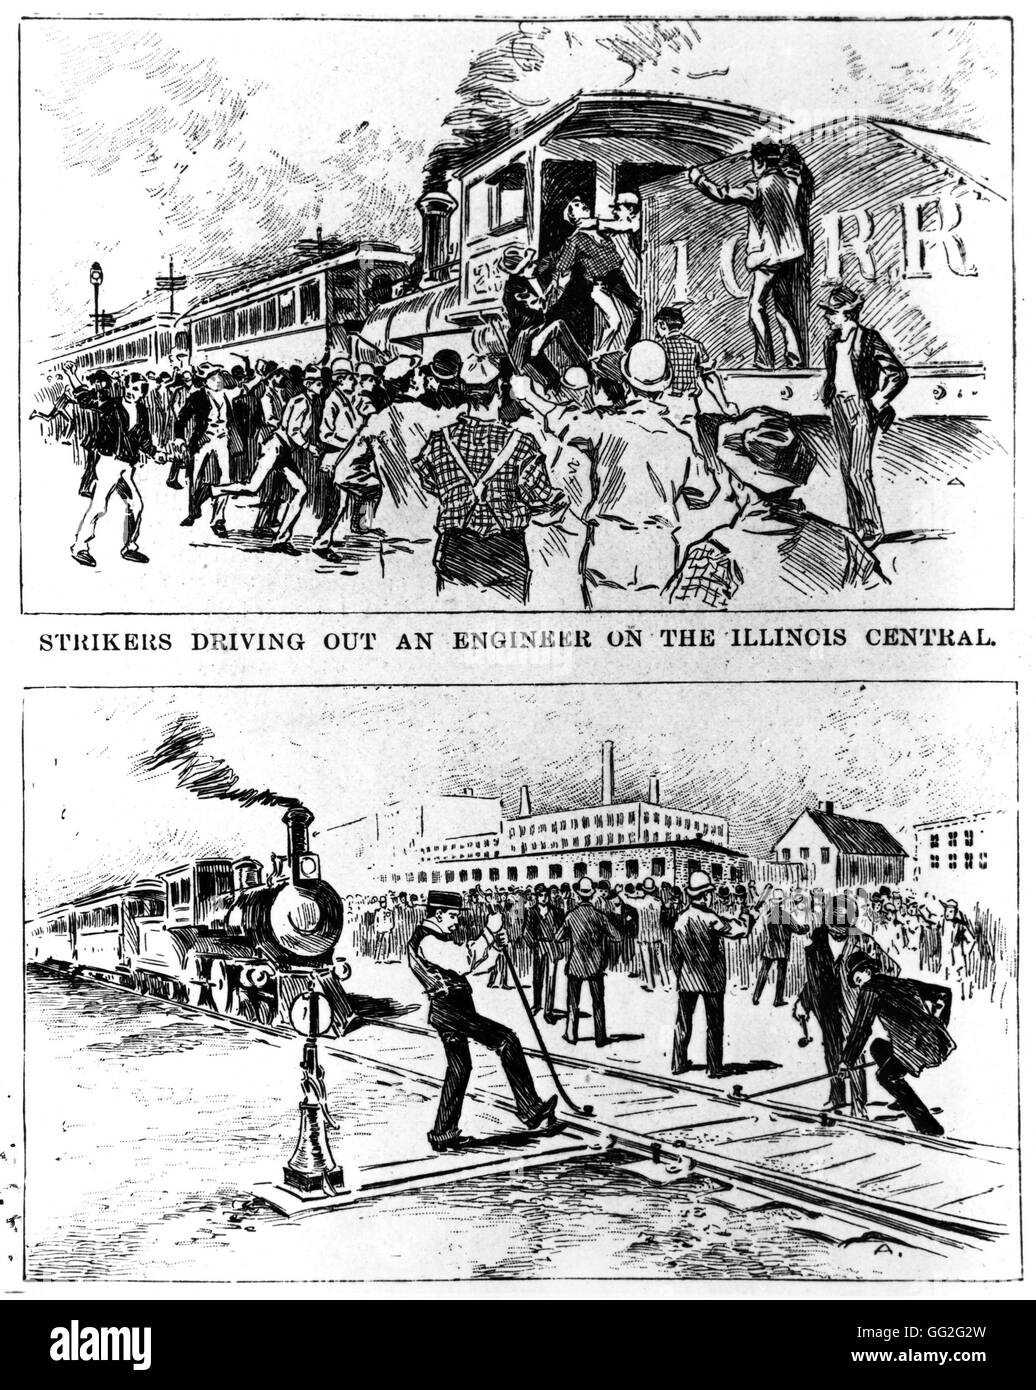 Pullman Strike: strikers Driving Out an Engineer on the Illinois Central, 1894. Stock Photo